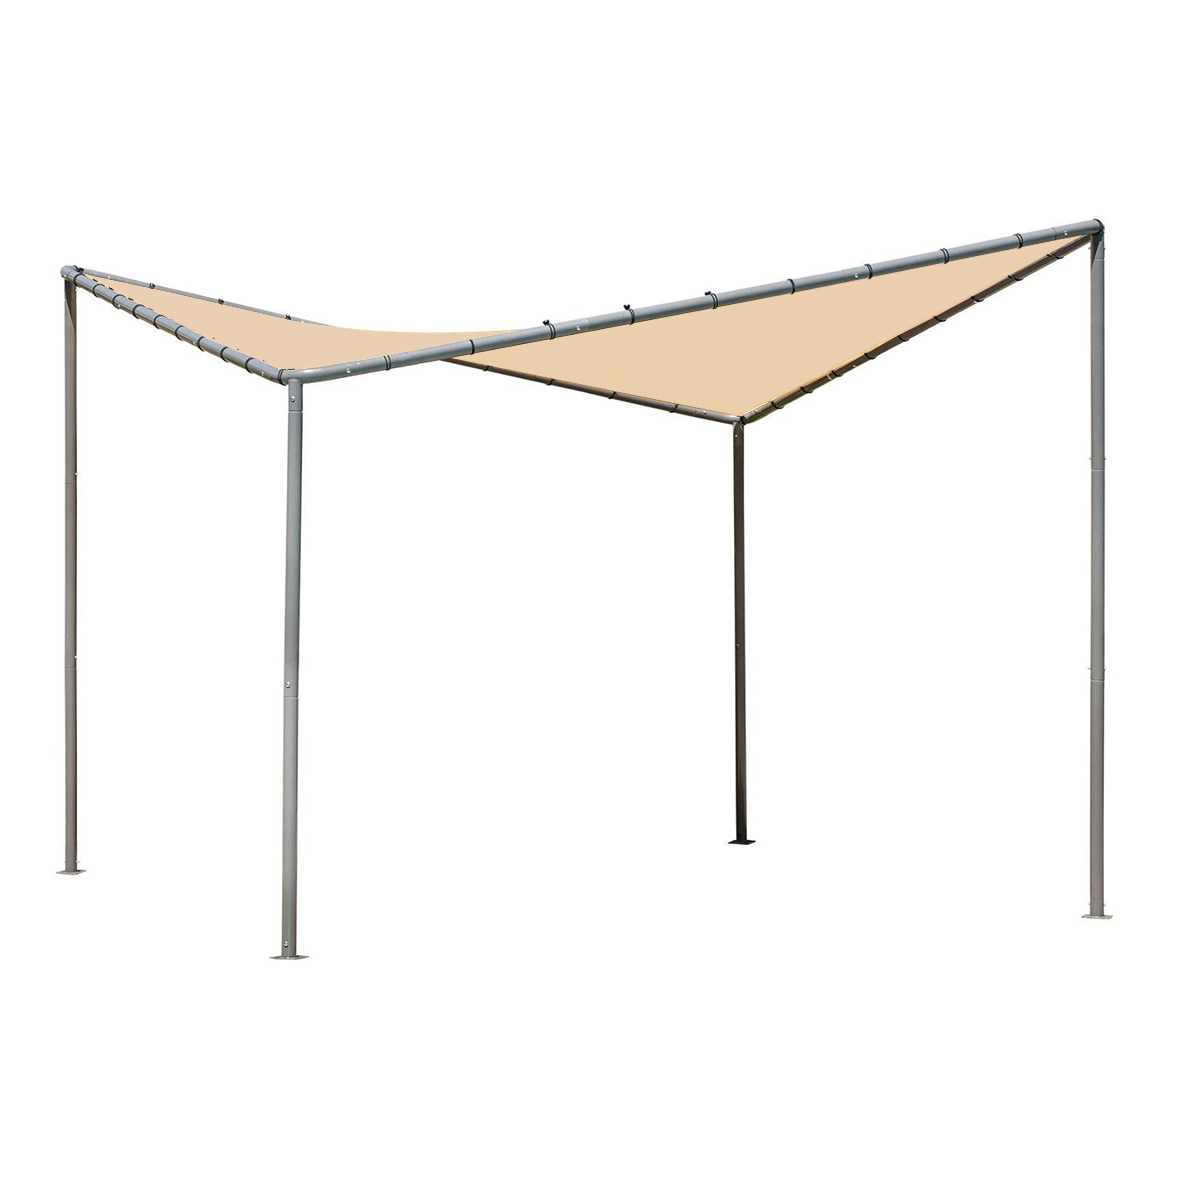 Replacement Canopy for 22514 Shelter Logic Del Rey Canopy - Ripl